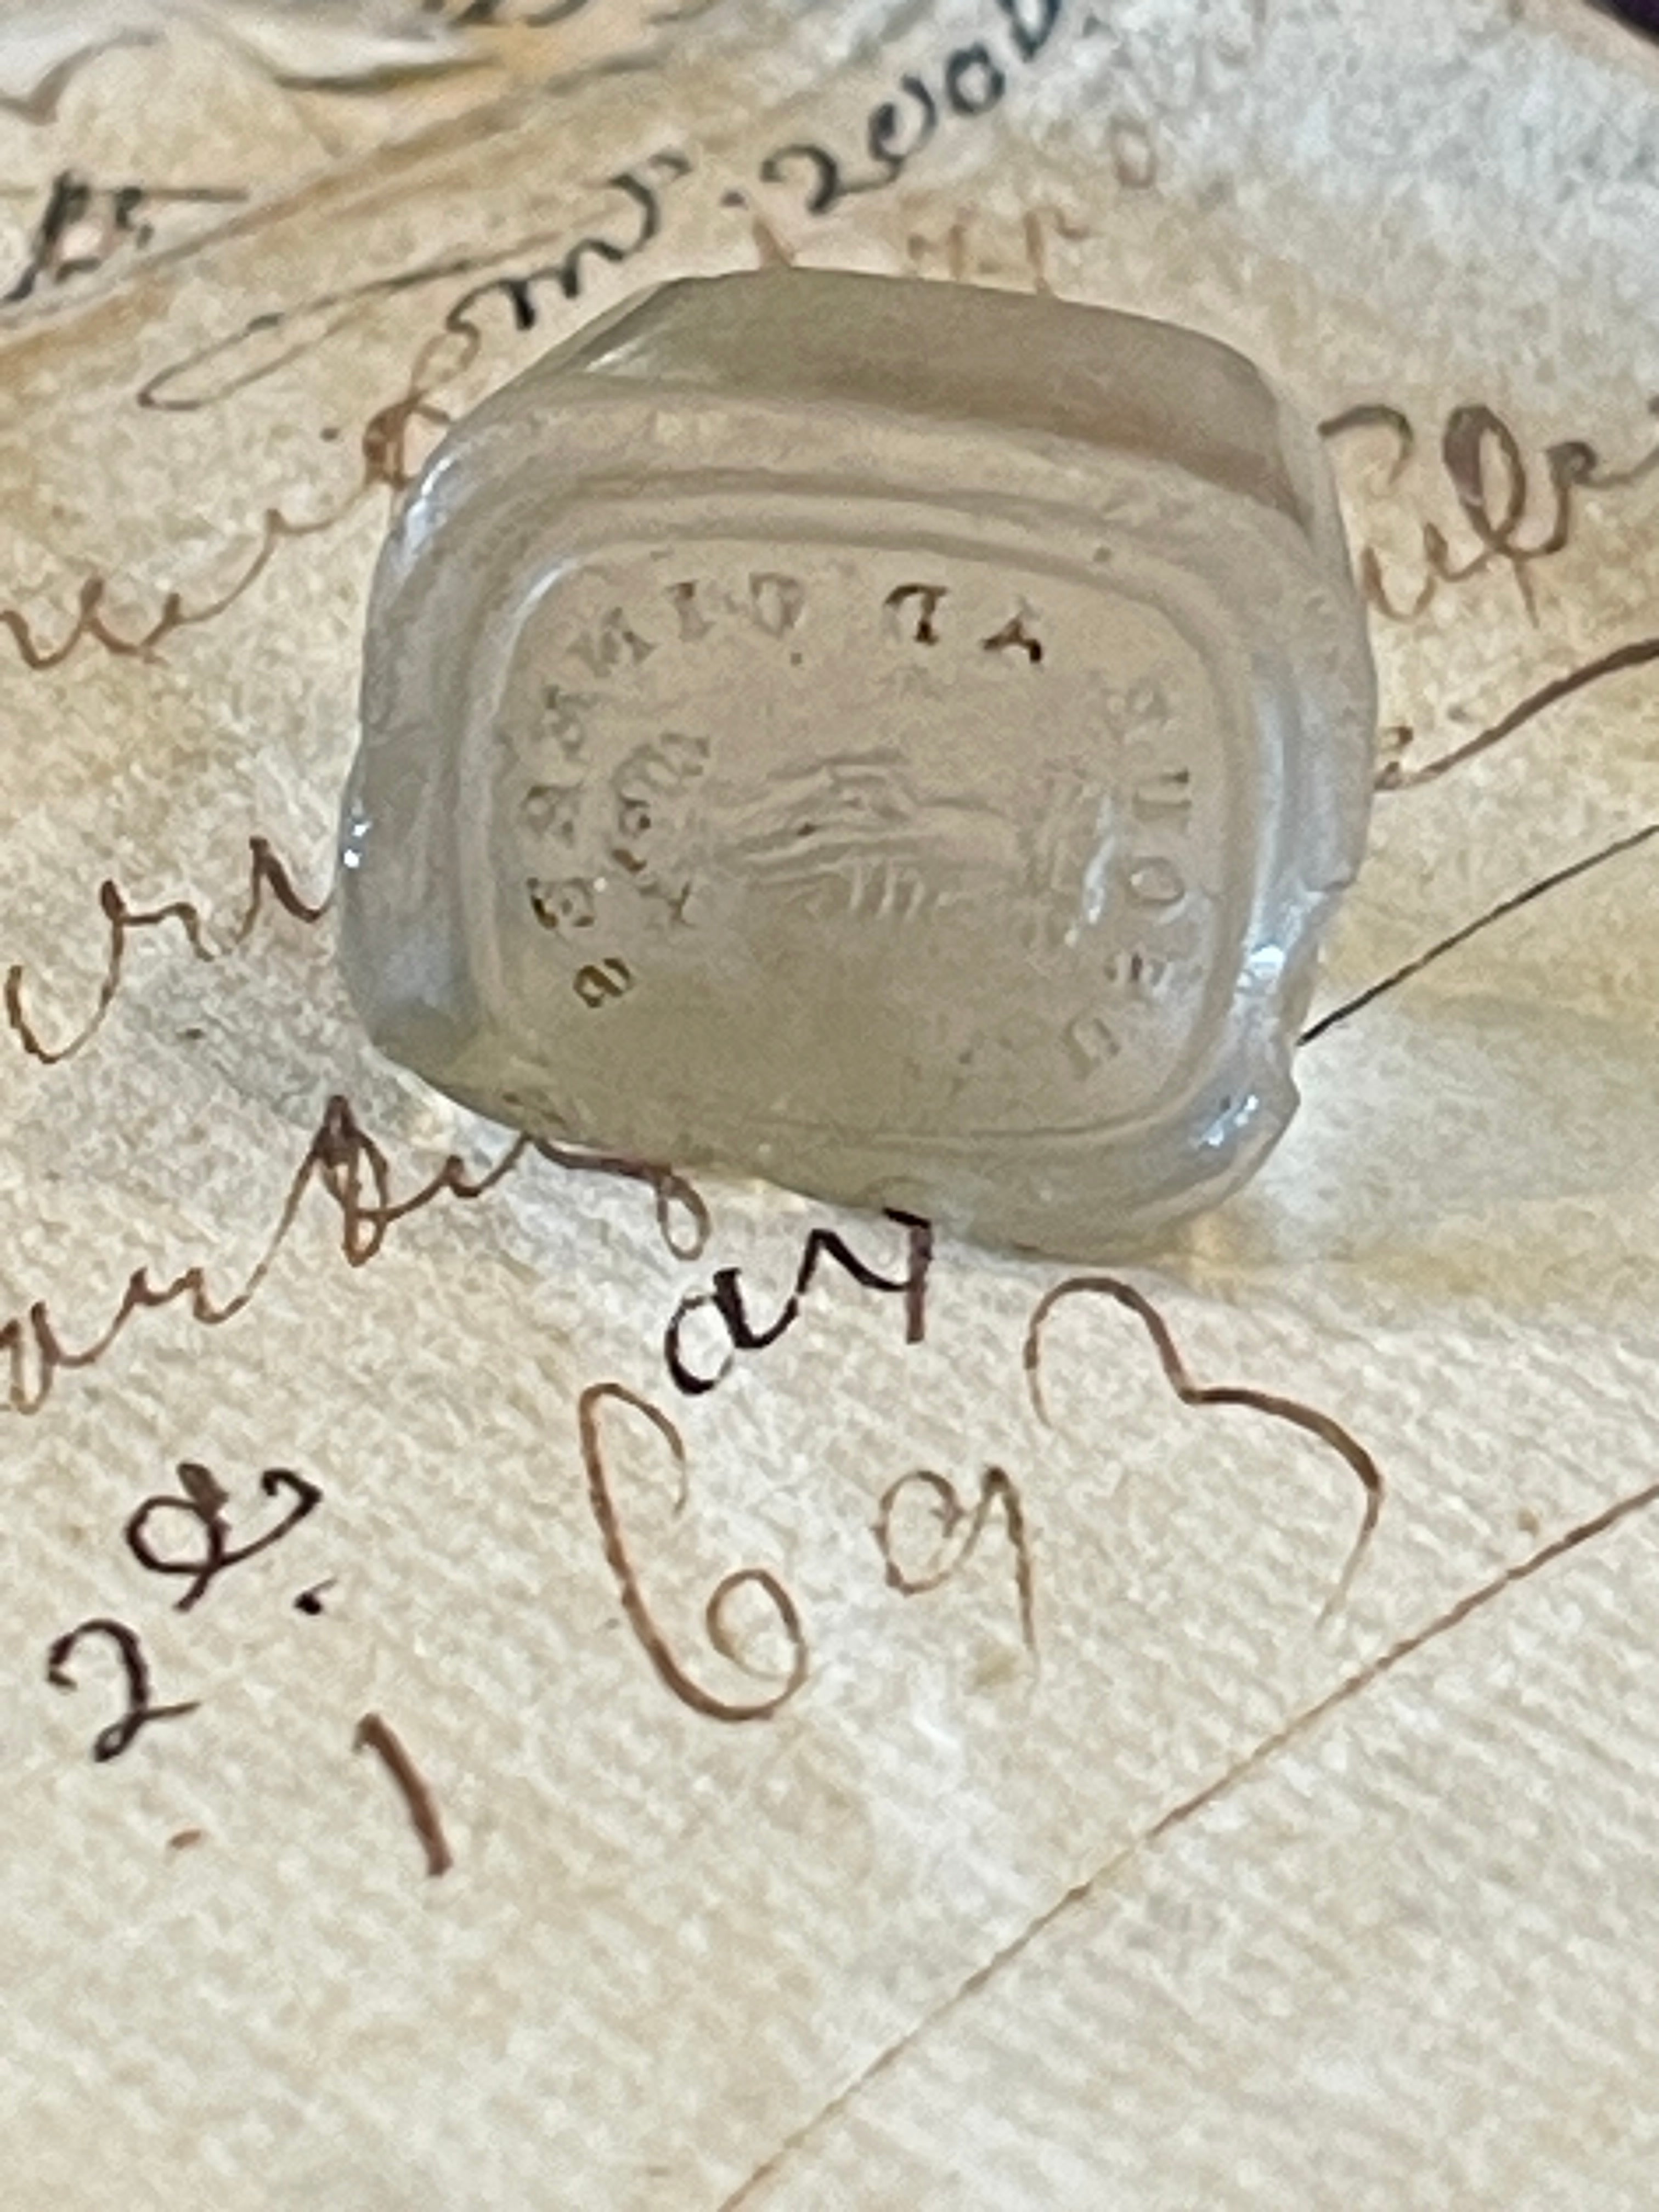 Antique Georgian Intaglio Seal  - "Usque Ad Cineres" - "From The Ashes To The Ashes"